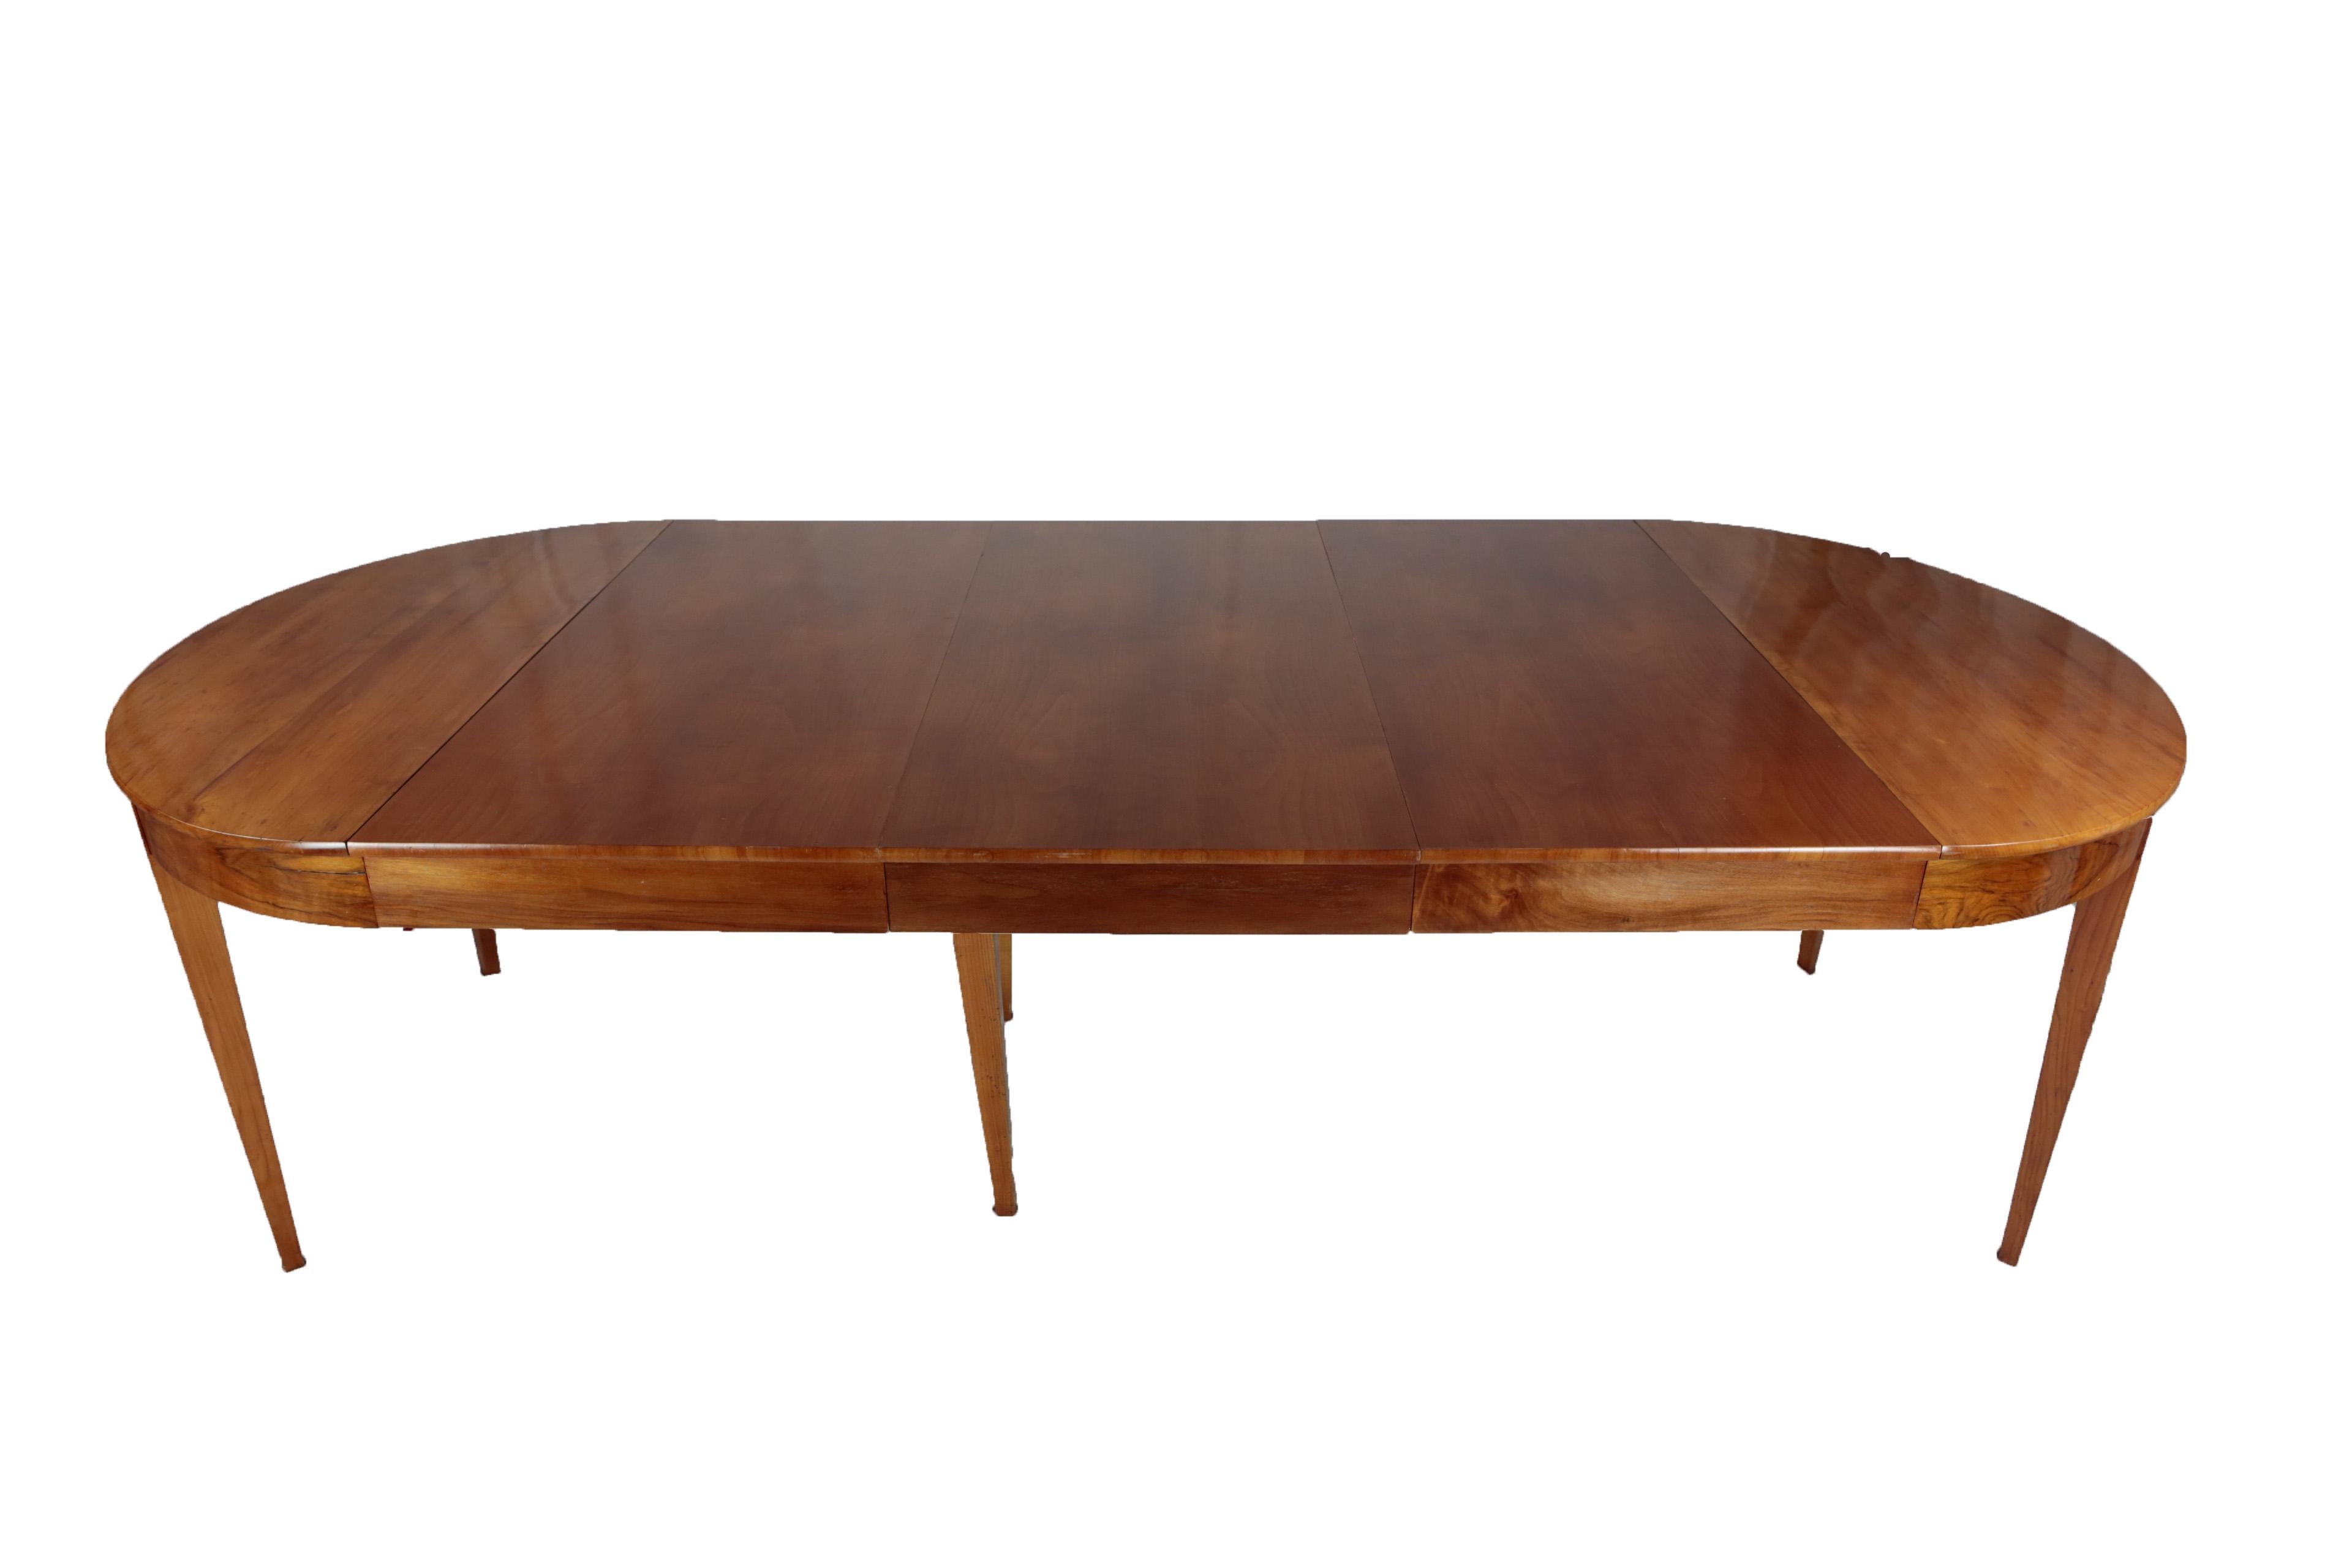 Biedermeier Period Dining Table, circa 1830-1840, Cherry and Nutwood, Extendable In Good Condition For Sale In Muenster, NRW